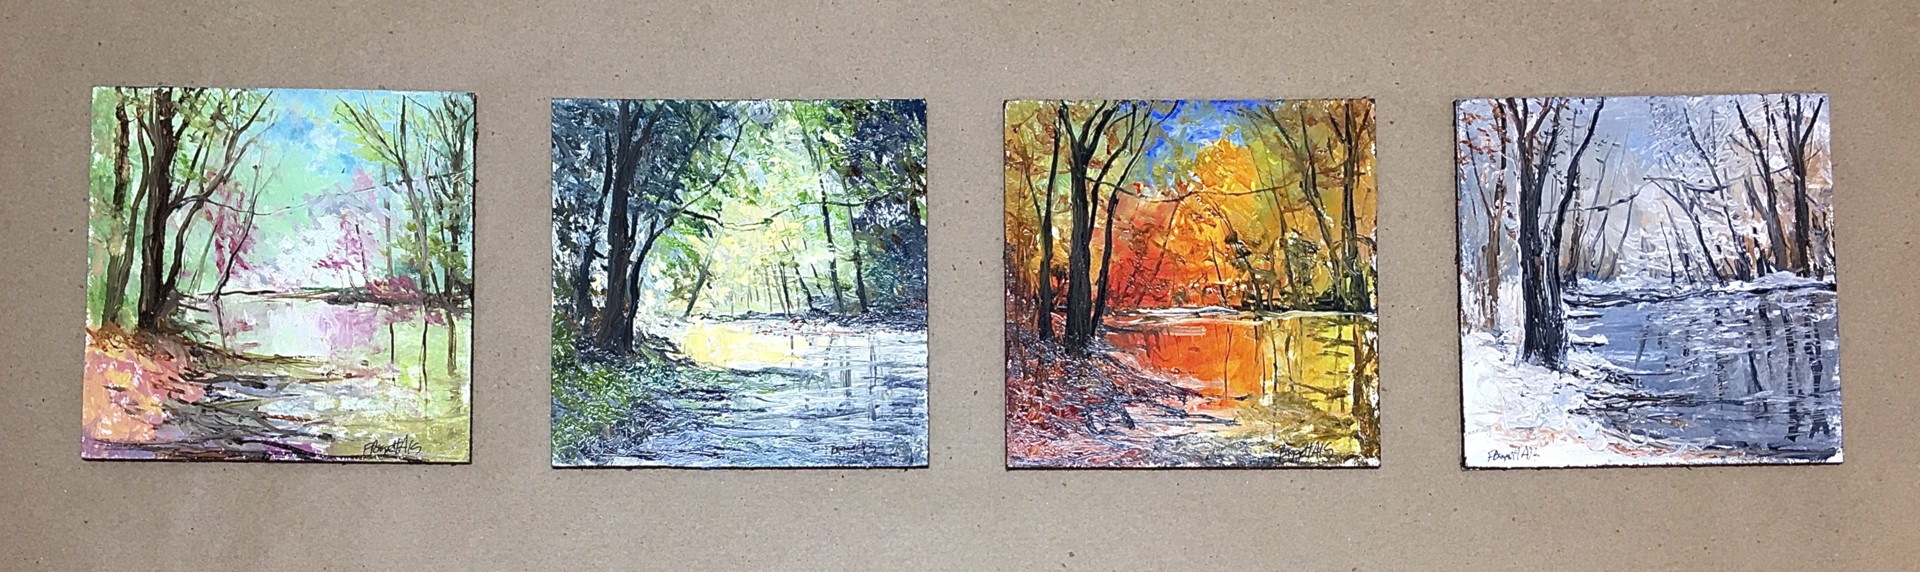 The Four Seasons (4 paintings) by Frank Baggett